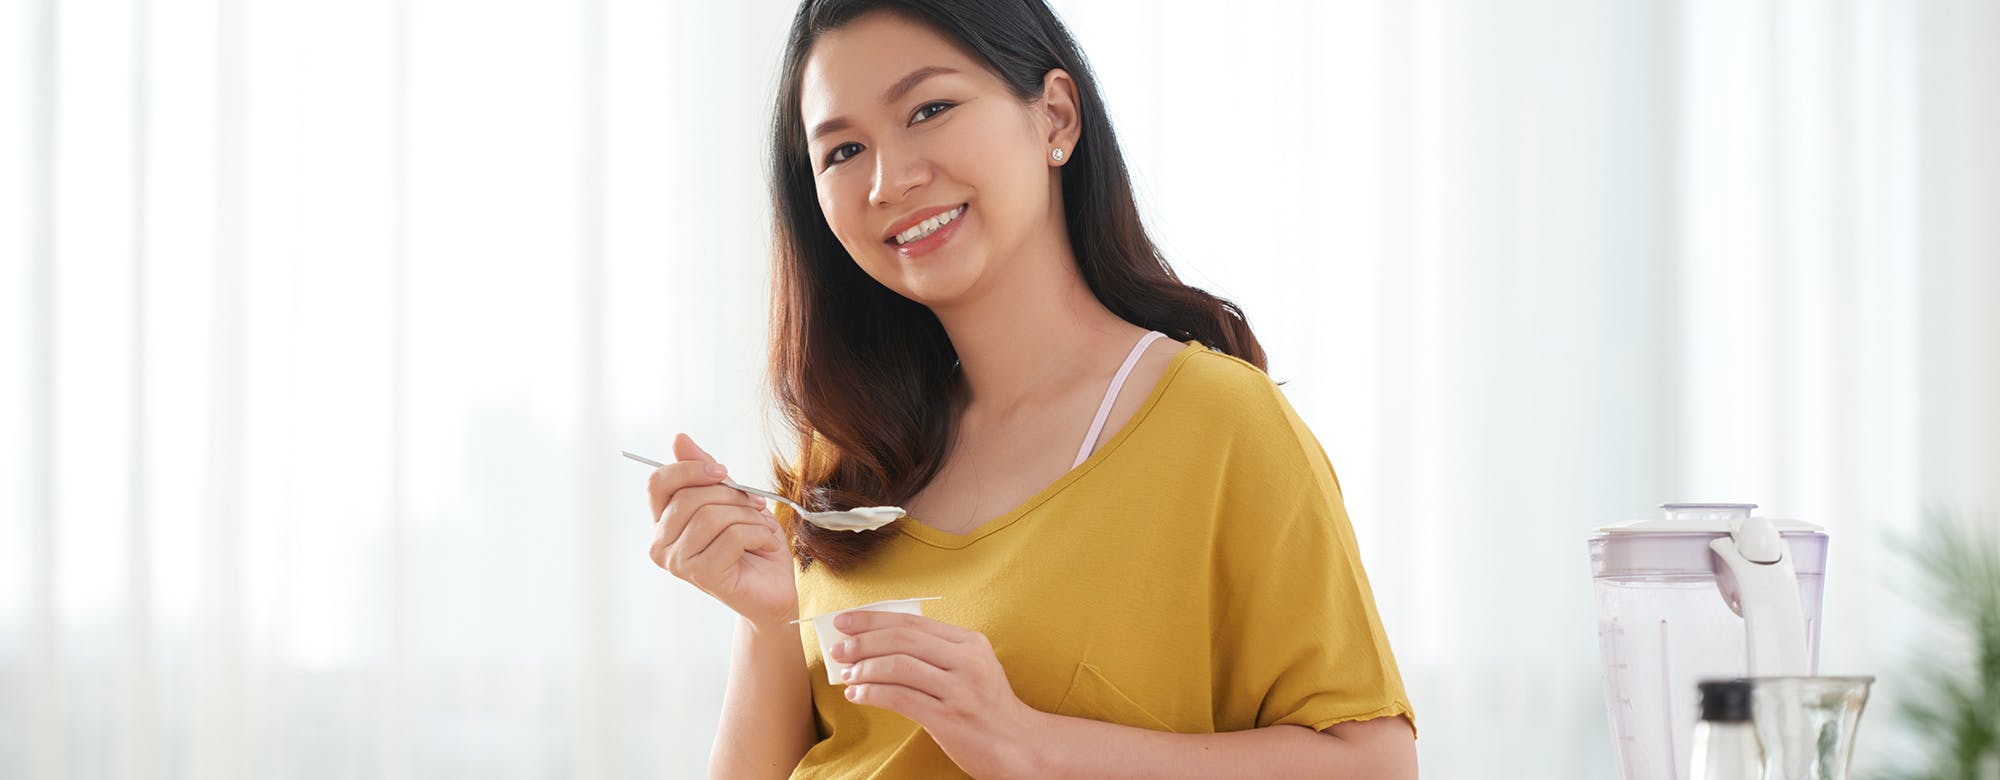 a pregnant woman eating a nutritious food